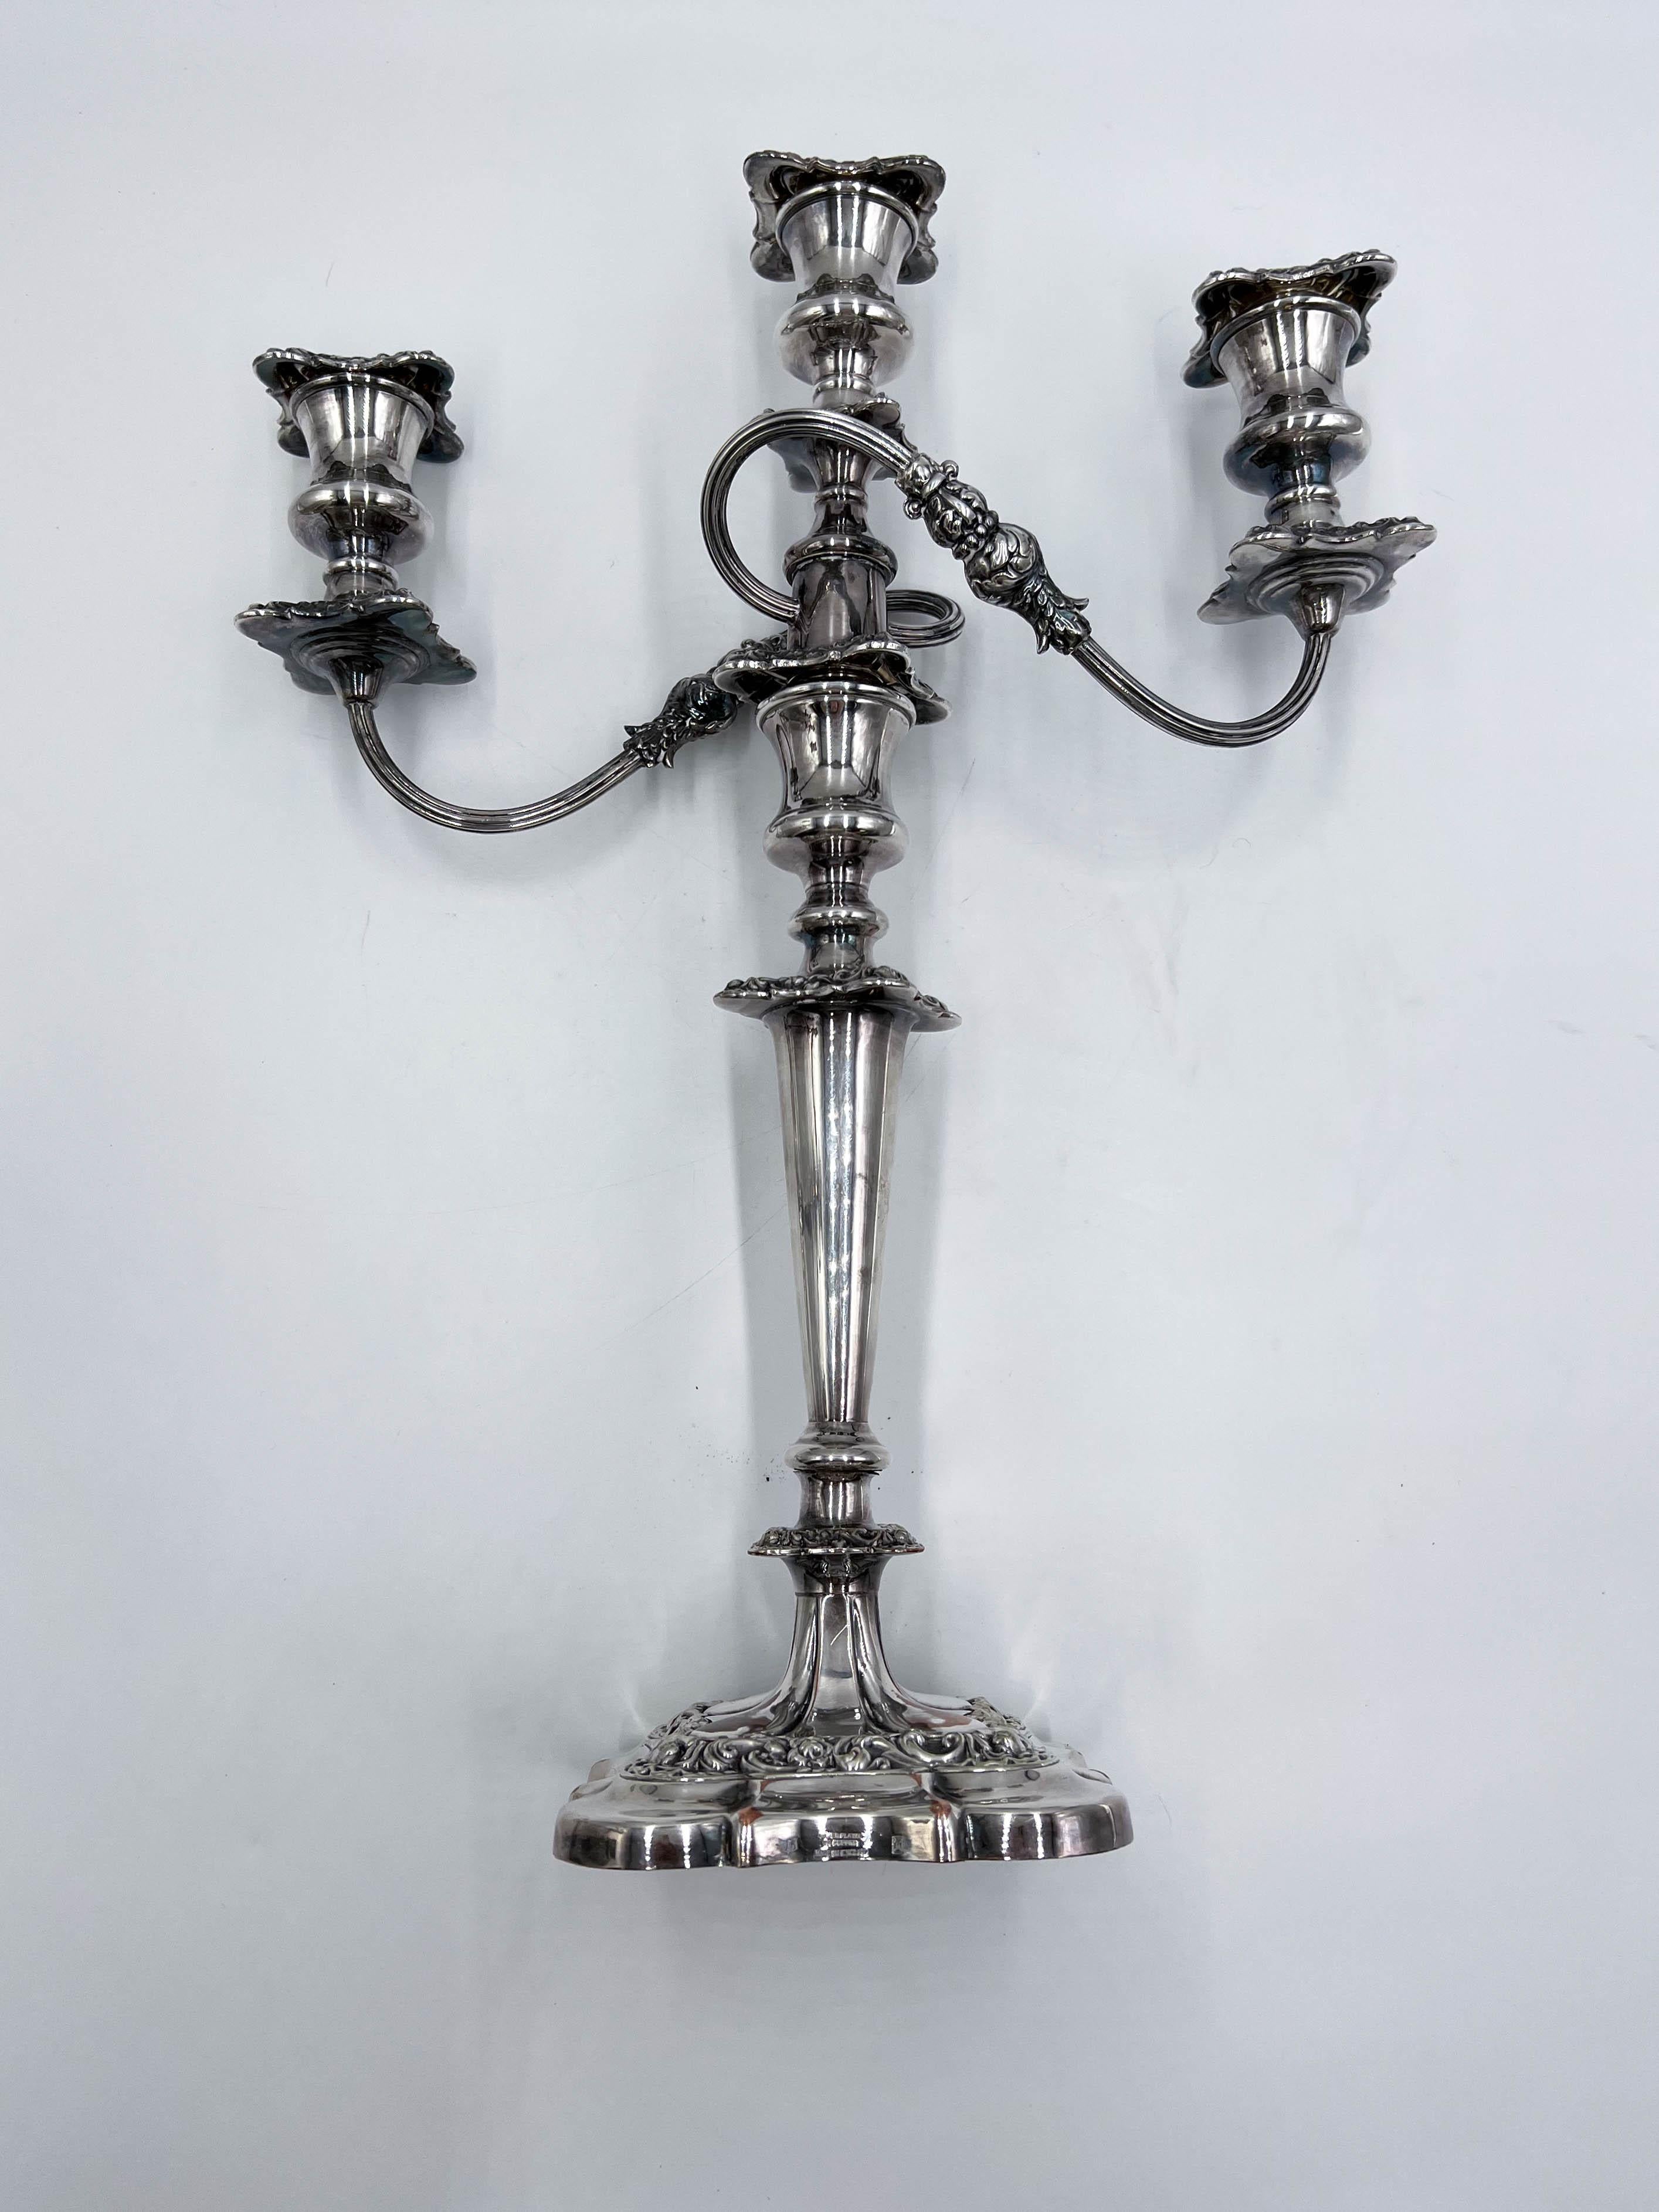 Pair of 1920s William Suckling Ltd English Silver Plate Candelabras/Candlesticks For Sale 9